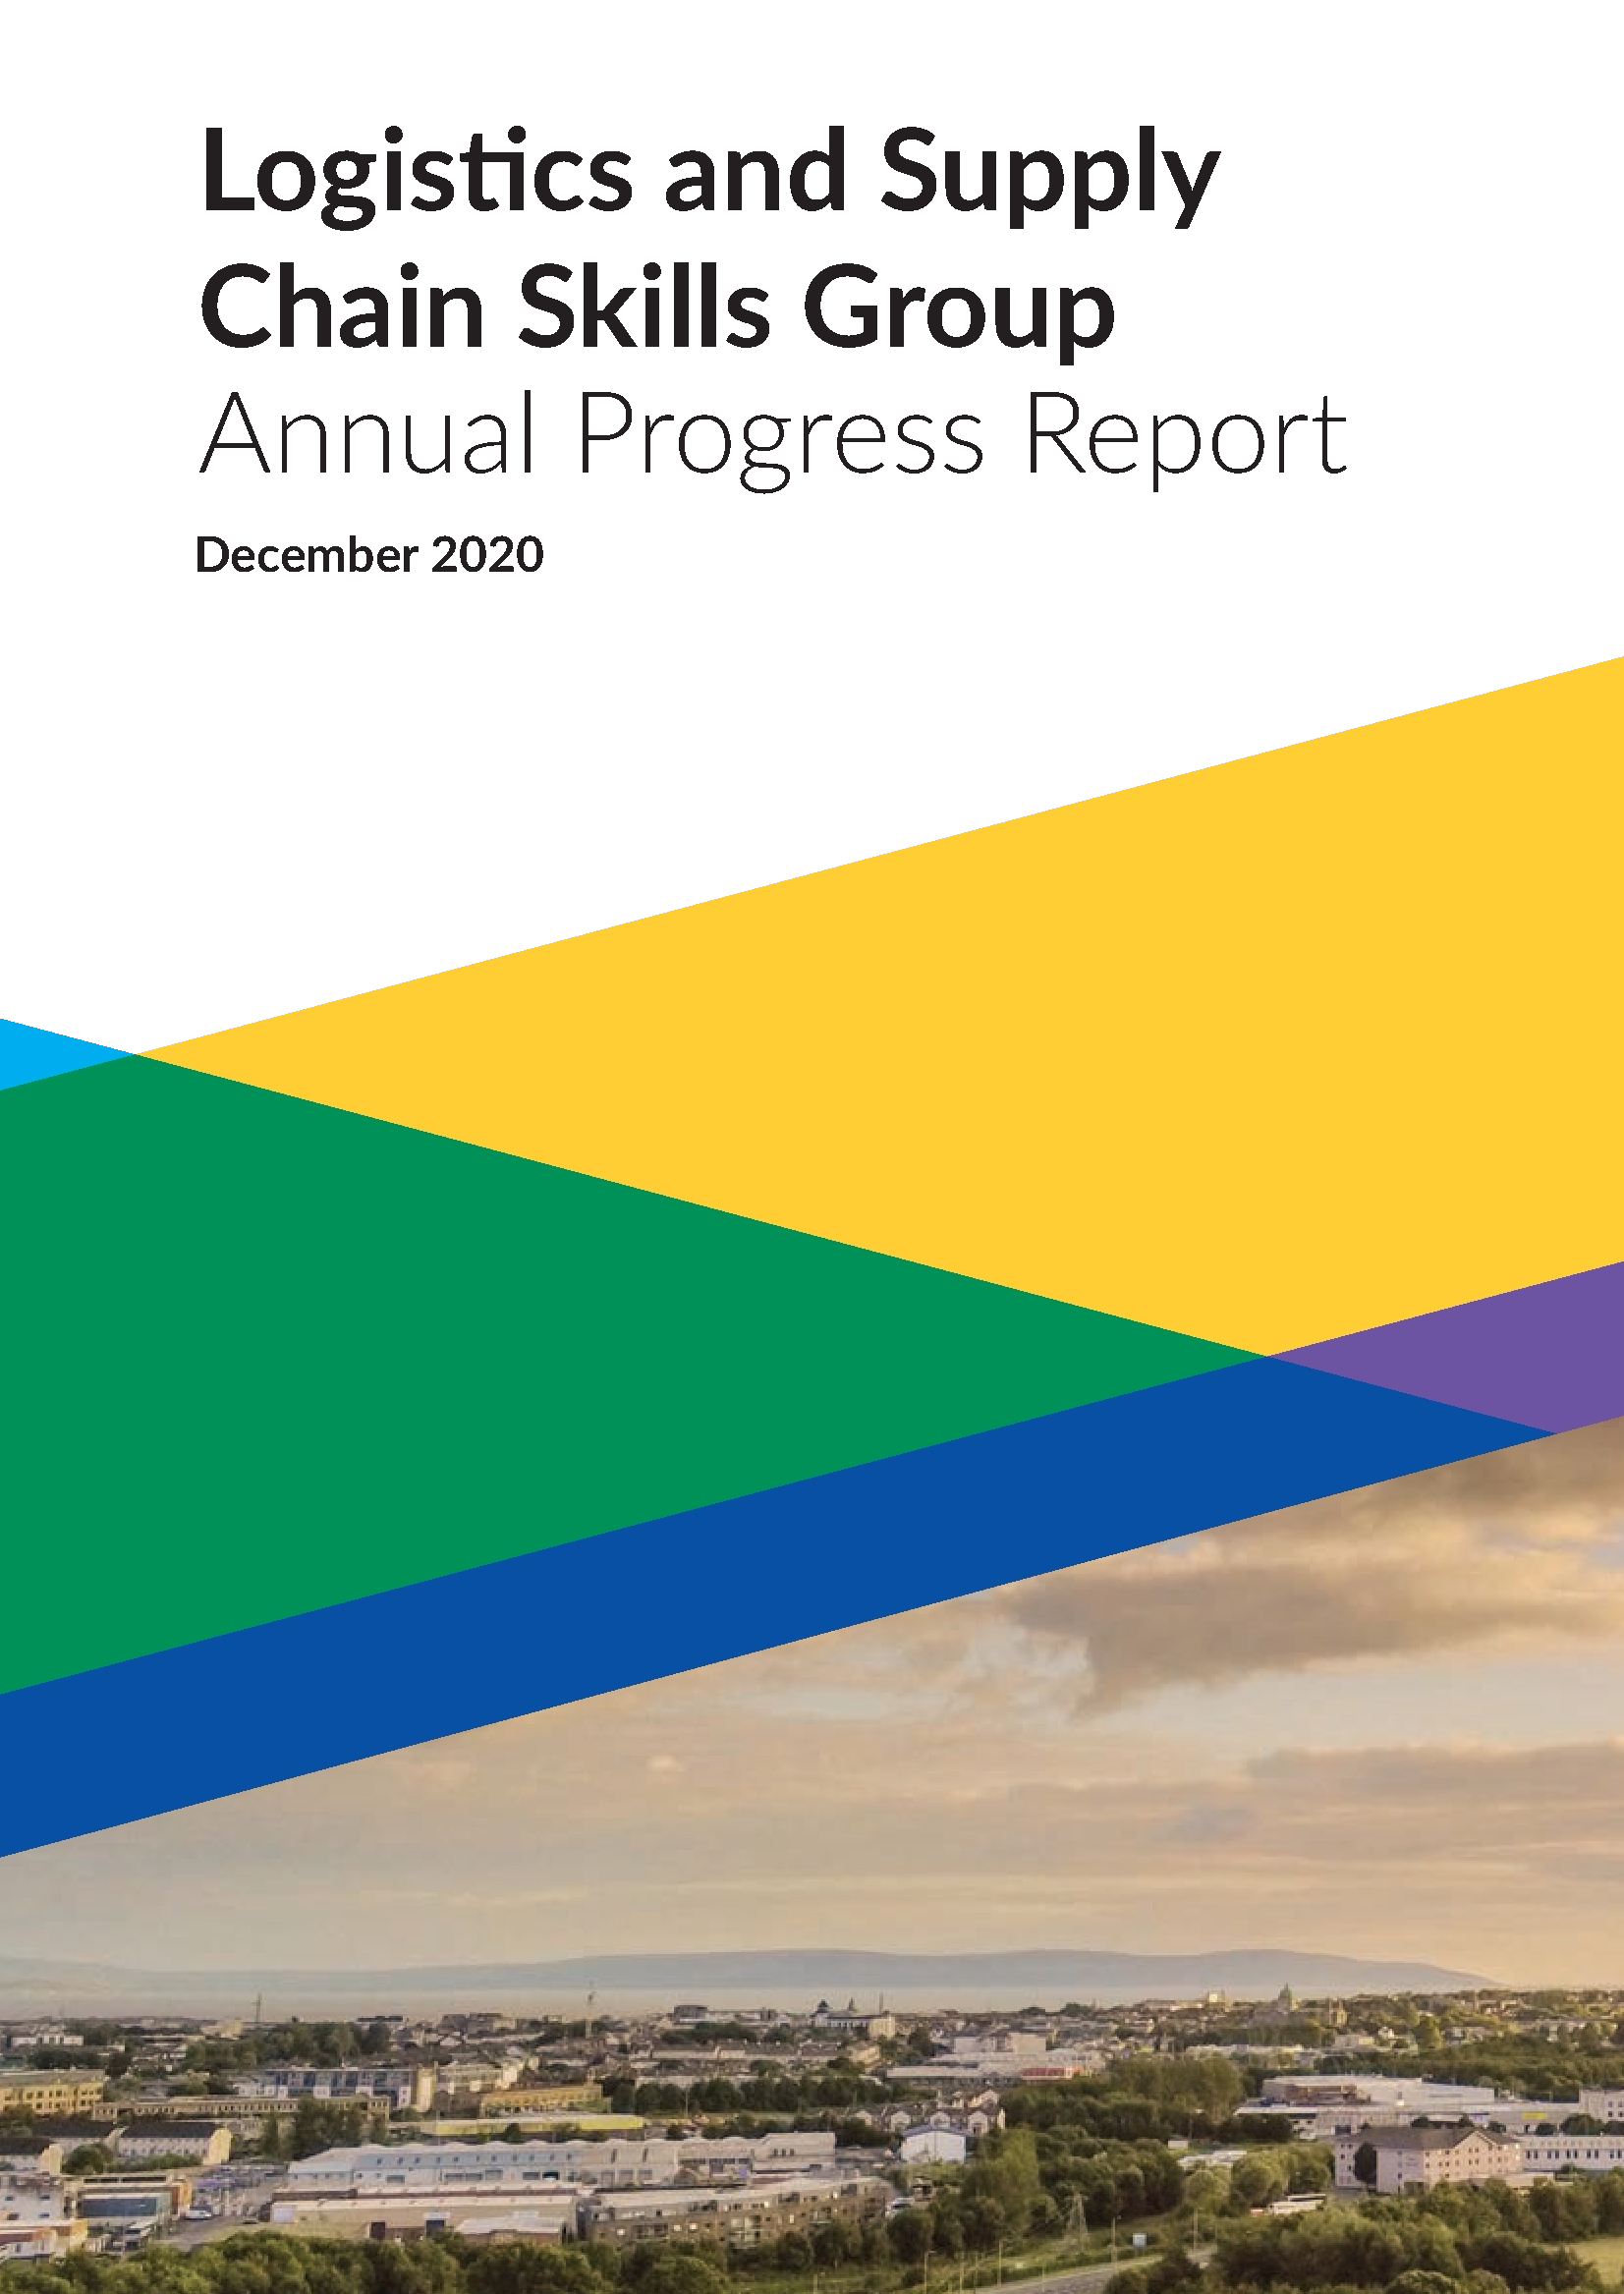 Logistics-and-Supply-Chain-Skills-Group-Annual-Progress-Report-Final